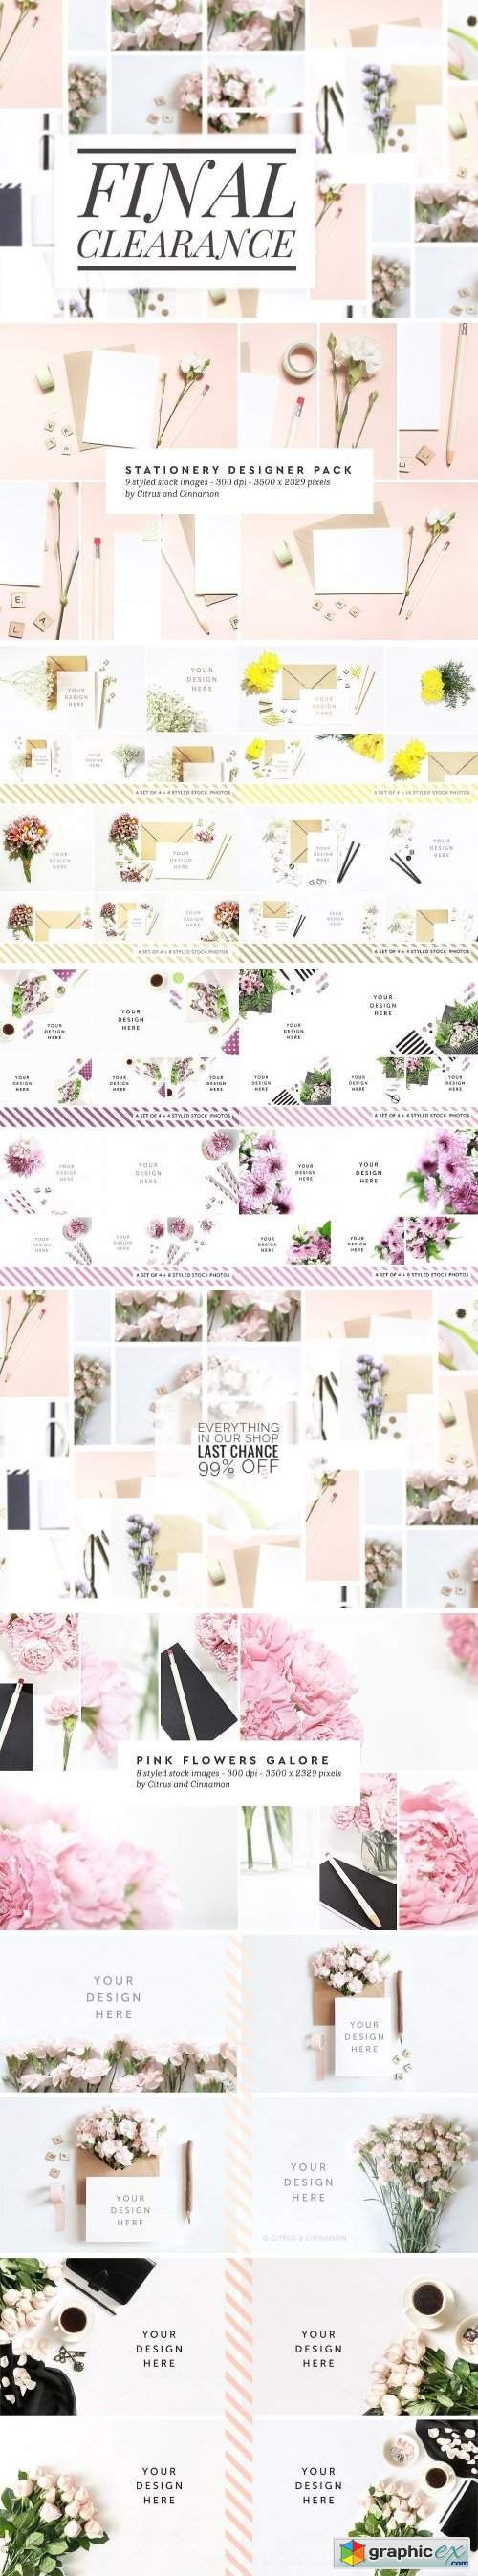 Styled Stock Photograpy - Cards and Invitation Mock Up - 99% OFF Final Clearance